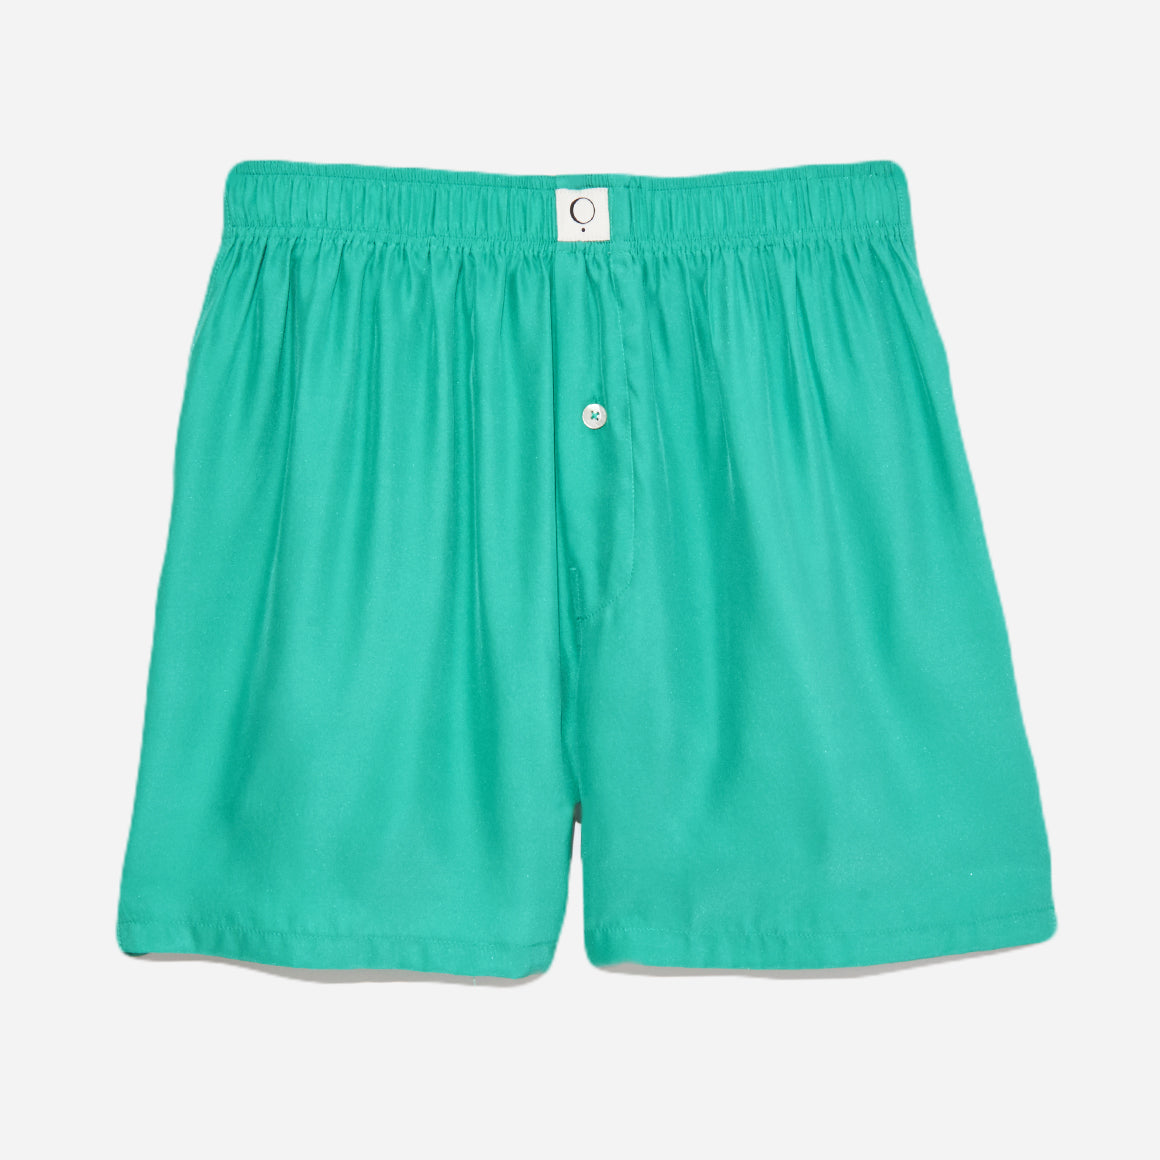 Our washable silk boxer shorts feature a relaxed fit, button fly, and a soft elastic waistband that when folded over reveals a contrast pop of color. The lightweight fabric offers breathability and comfort for a peaceful night's sleep and a stylish look that is perfect for lounging at home.